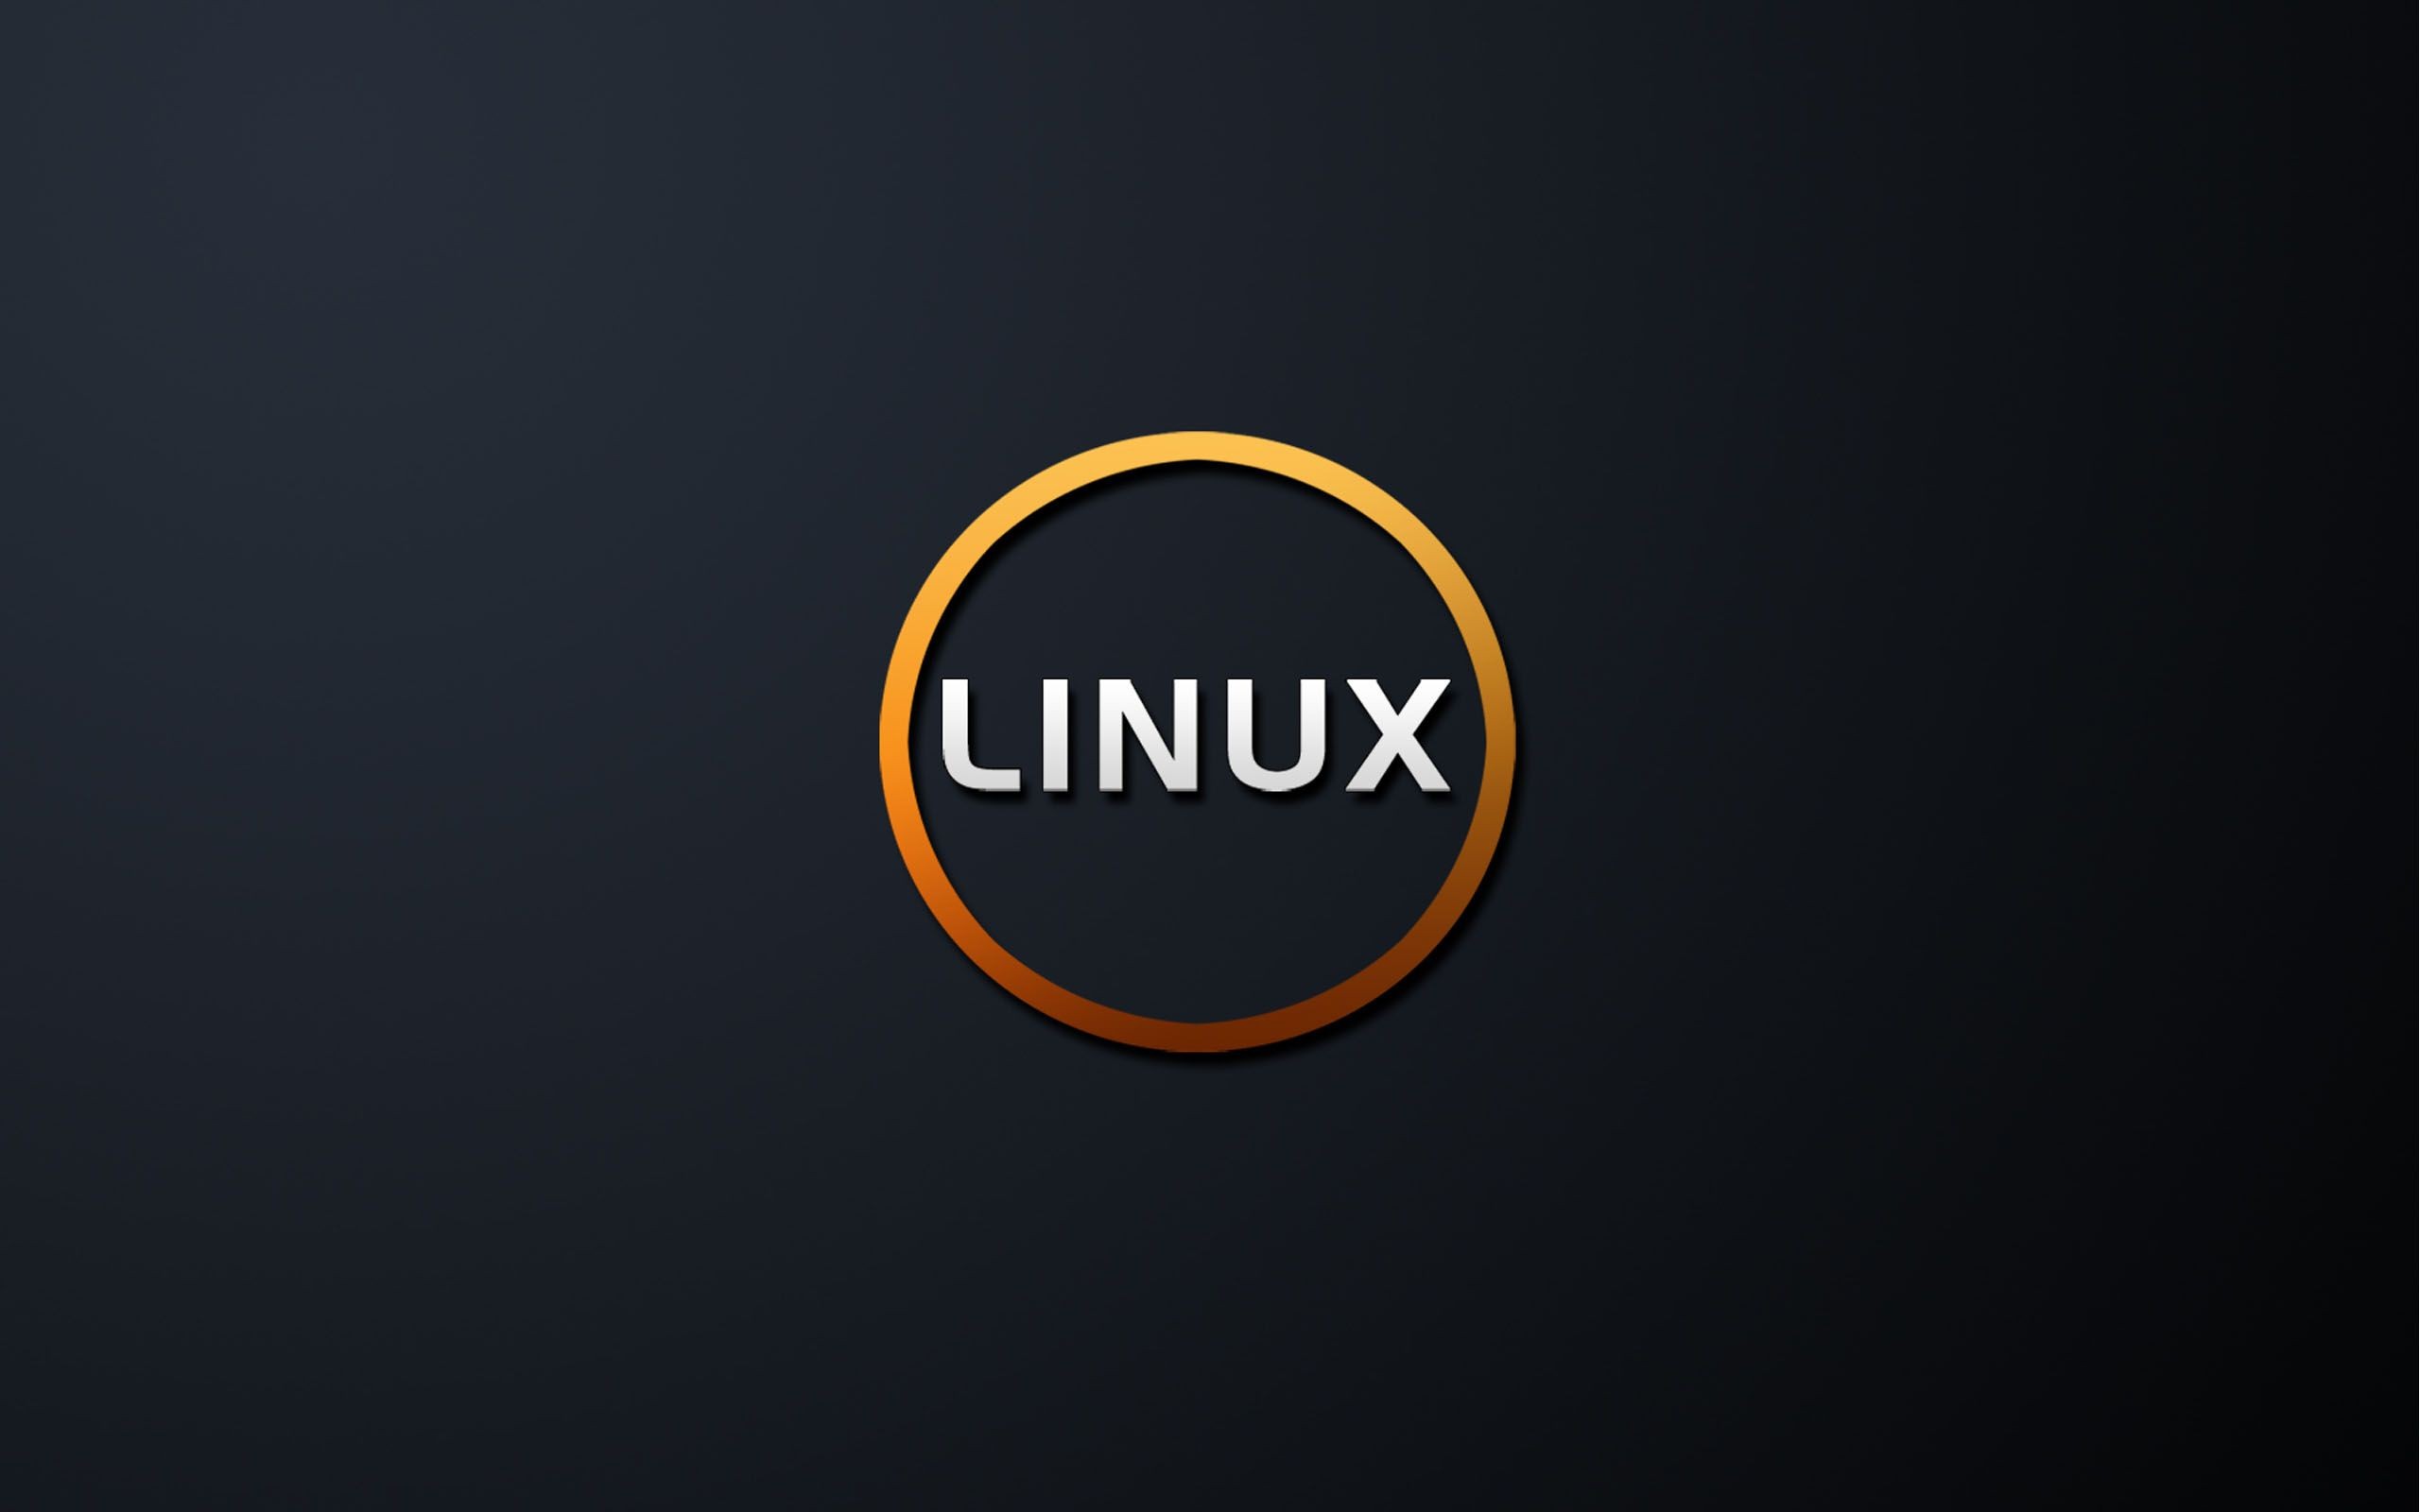 Linux wallpaper  Download free High Resolution backgrounds for ...